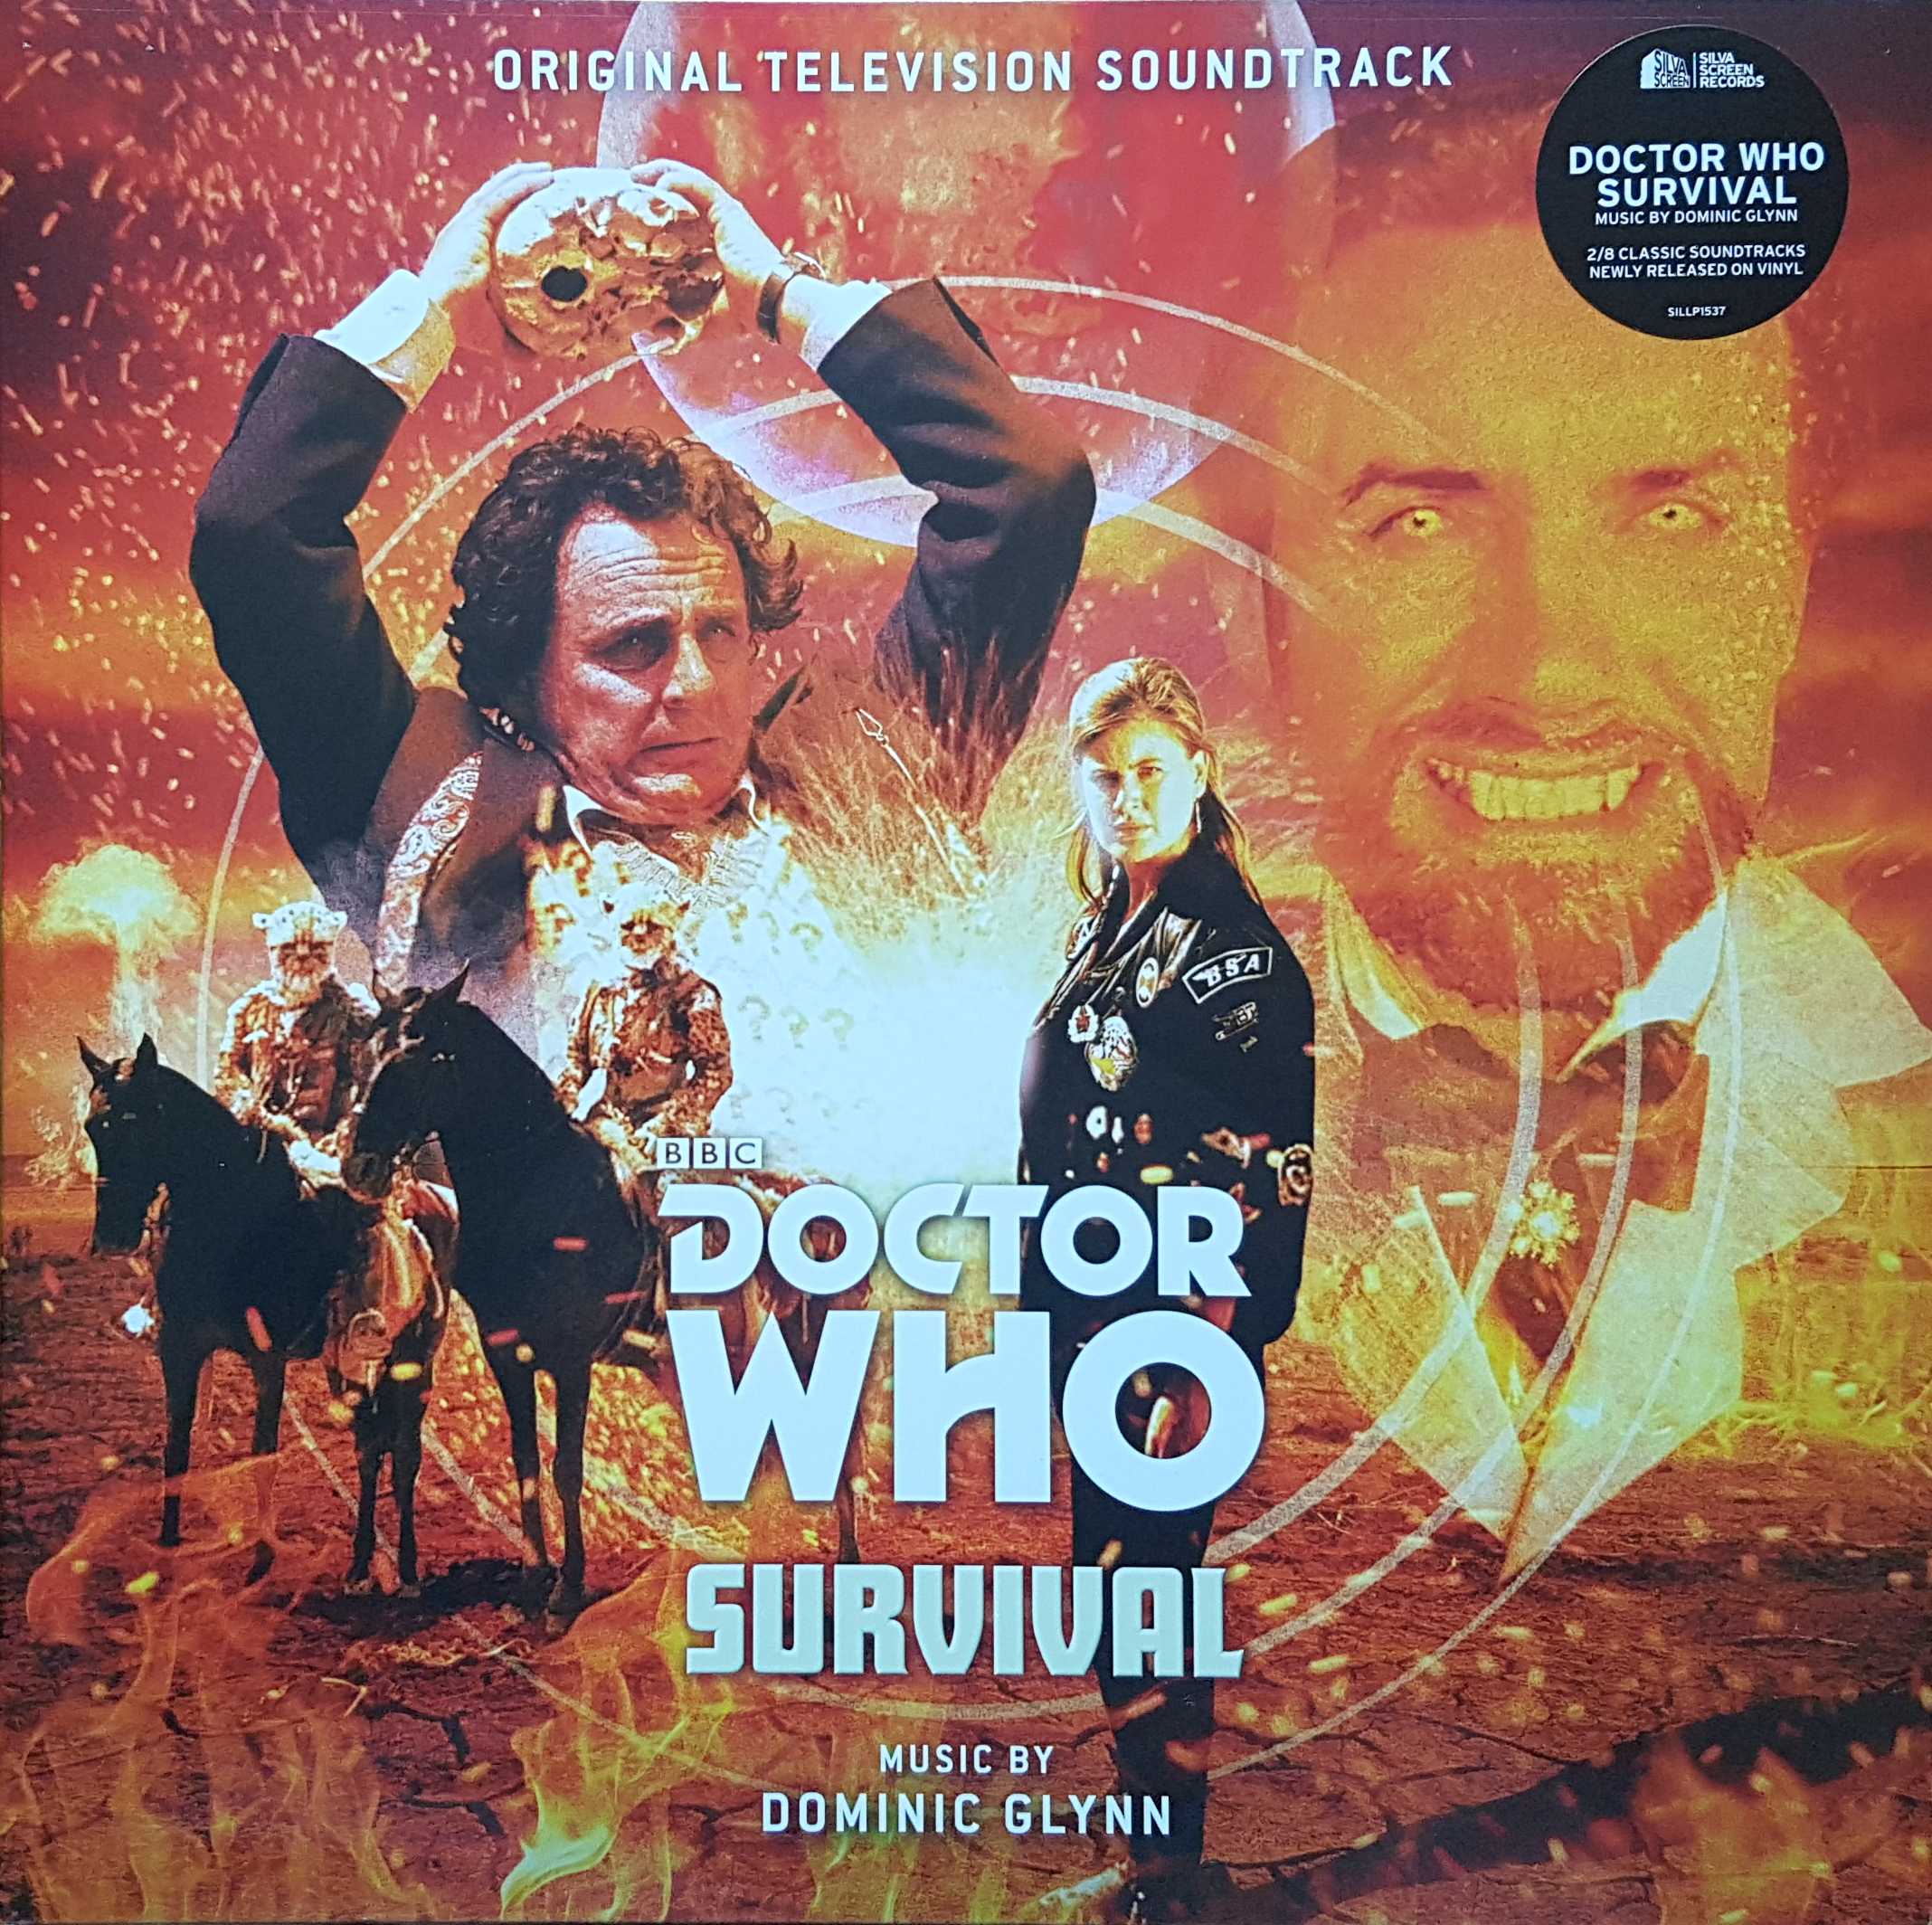 Picture of SILLP 1537 Doctor Who - Survival by artist Dominic Glynn from the BBC albums - Records and Tapes library